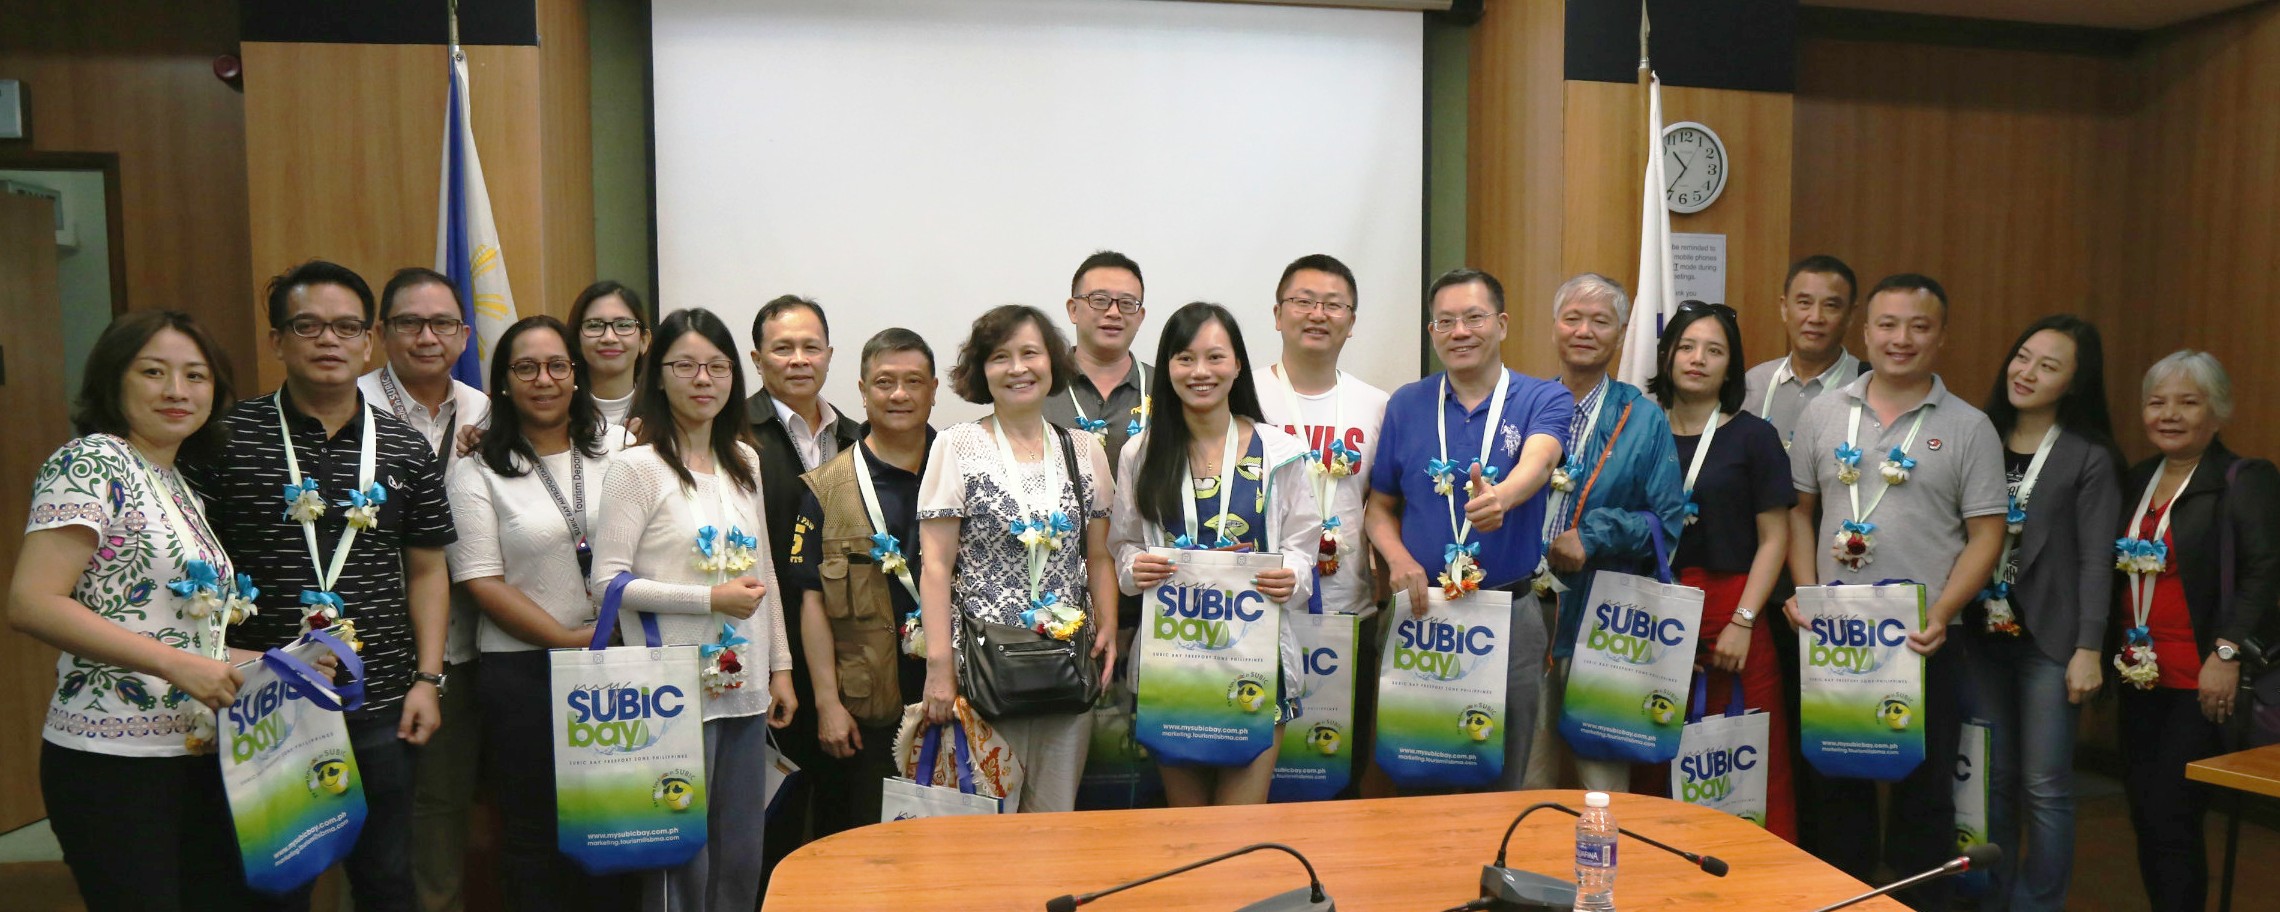 Delegates from the Zhoushan International Cruise Port and the Chinese Ministry of Culture and Tourism, as well as officials of cruise lines and travel agencies, pose with SBMA officials during a courtesy call at the SBMA office on Monday.